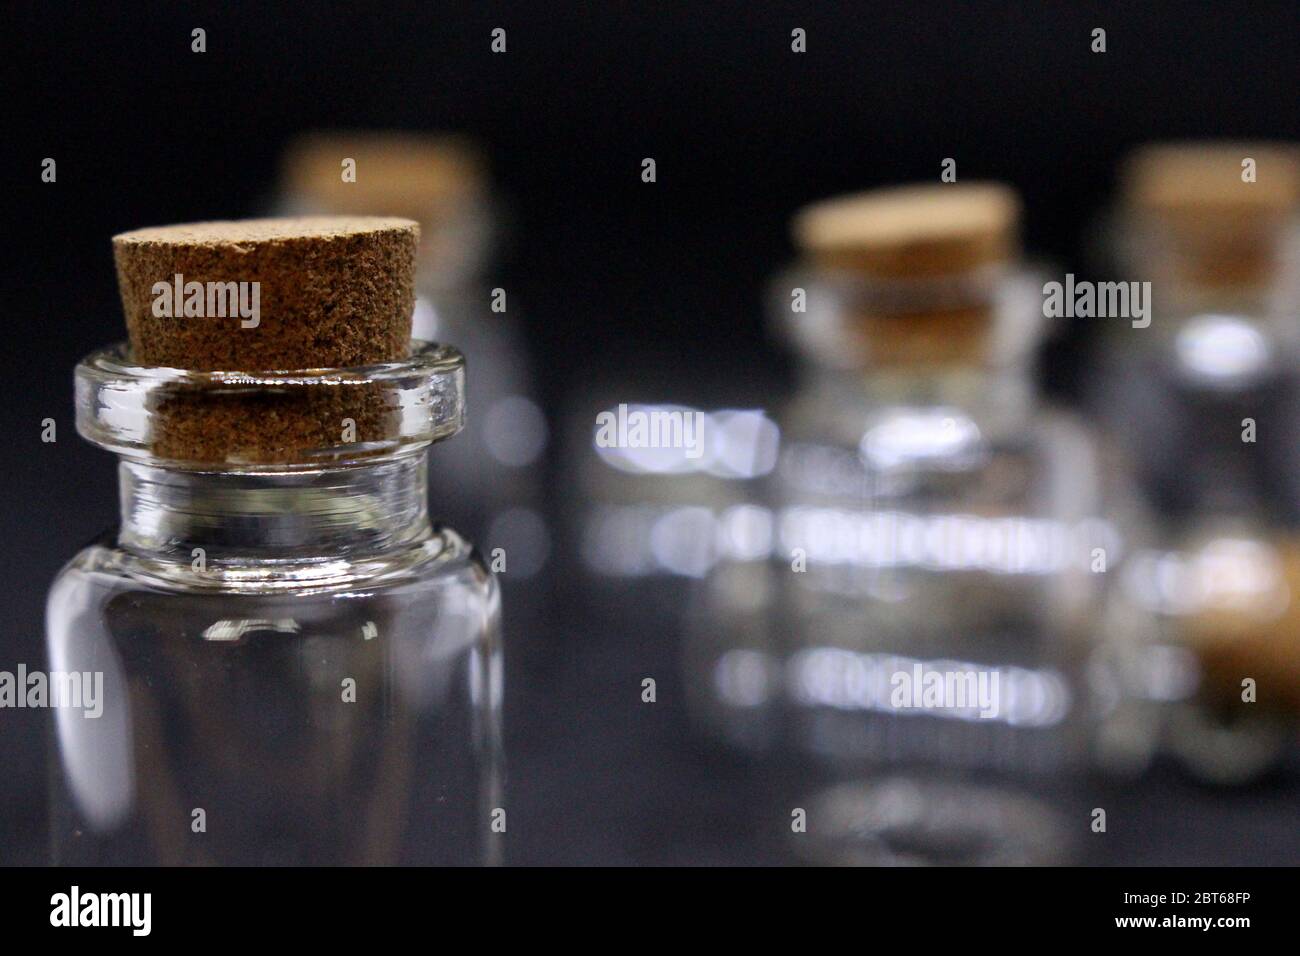 A close up photograph of empty glass bottles with cork stoppers, against a black background Stock Photo